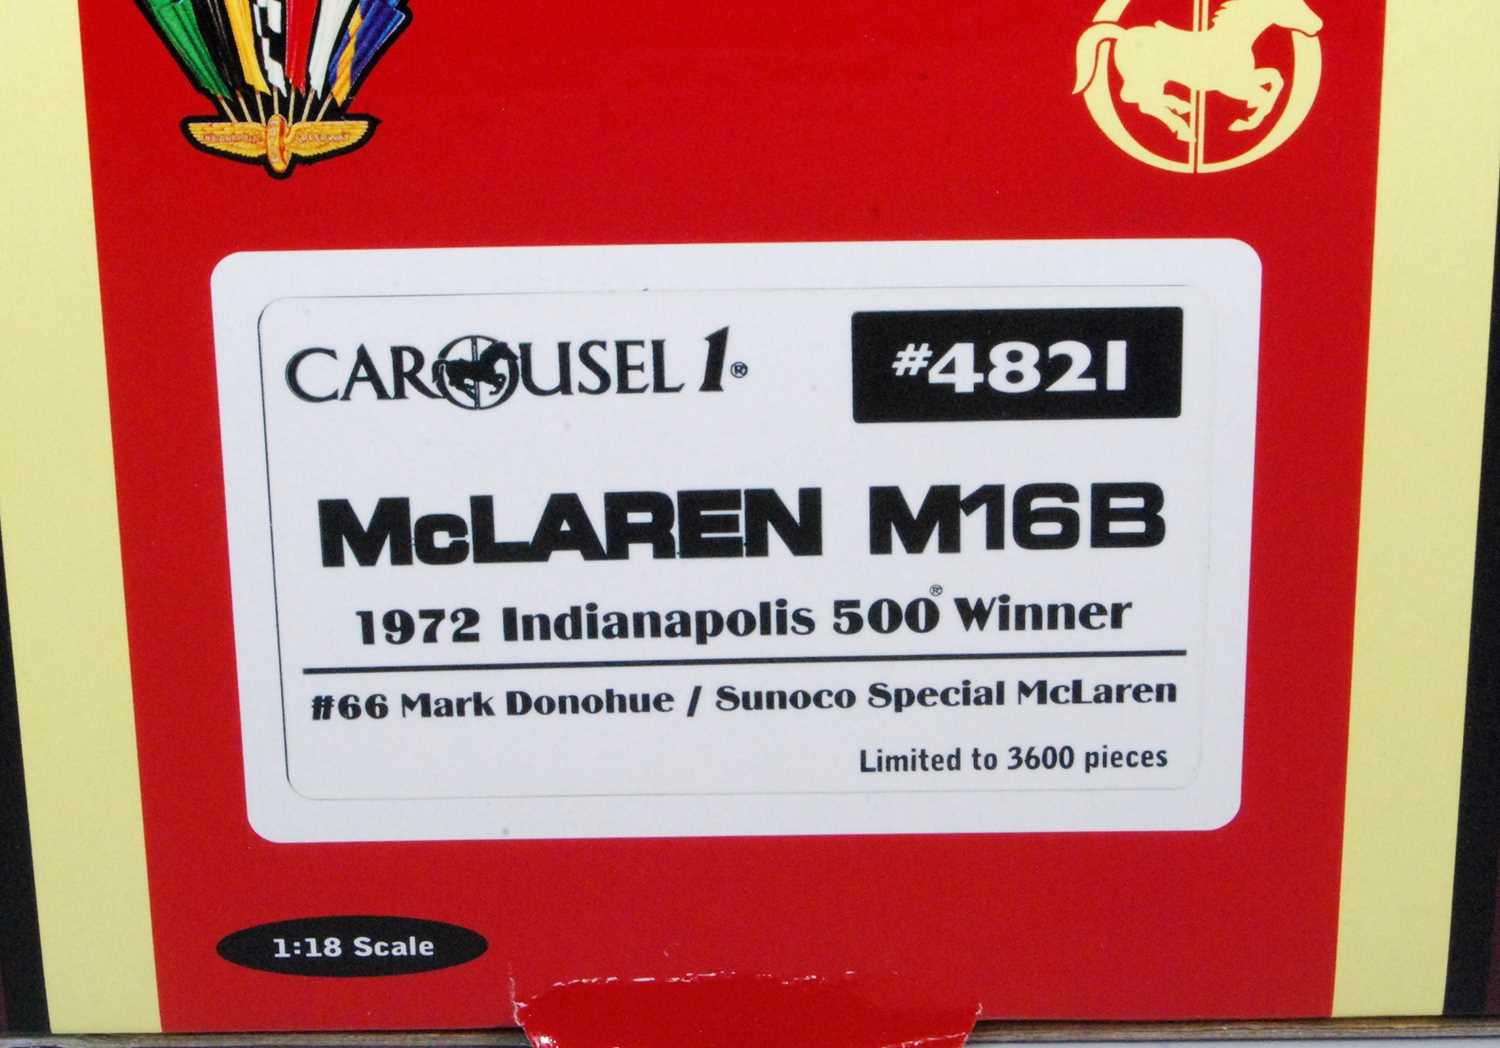 A Carousel 1 No. 4821 1/18 scale model of a Maclaren M16B 1972 Indy 500 winner, Sunoco Special - Image 3 of 3